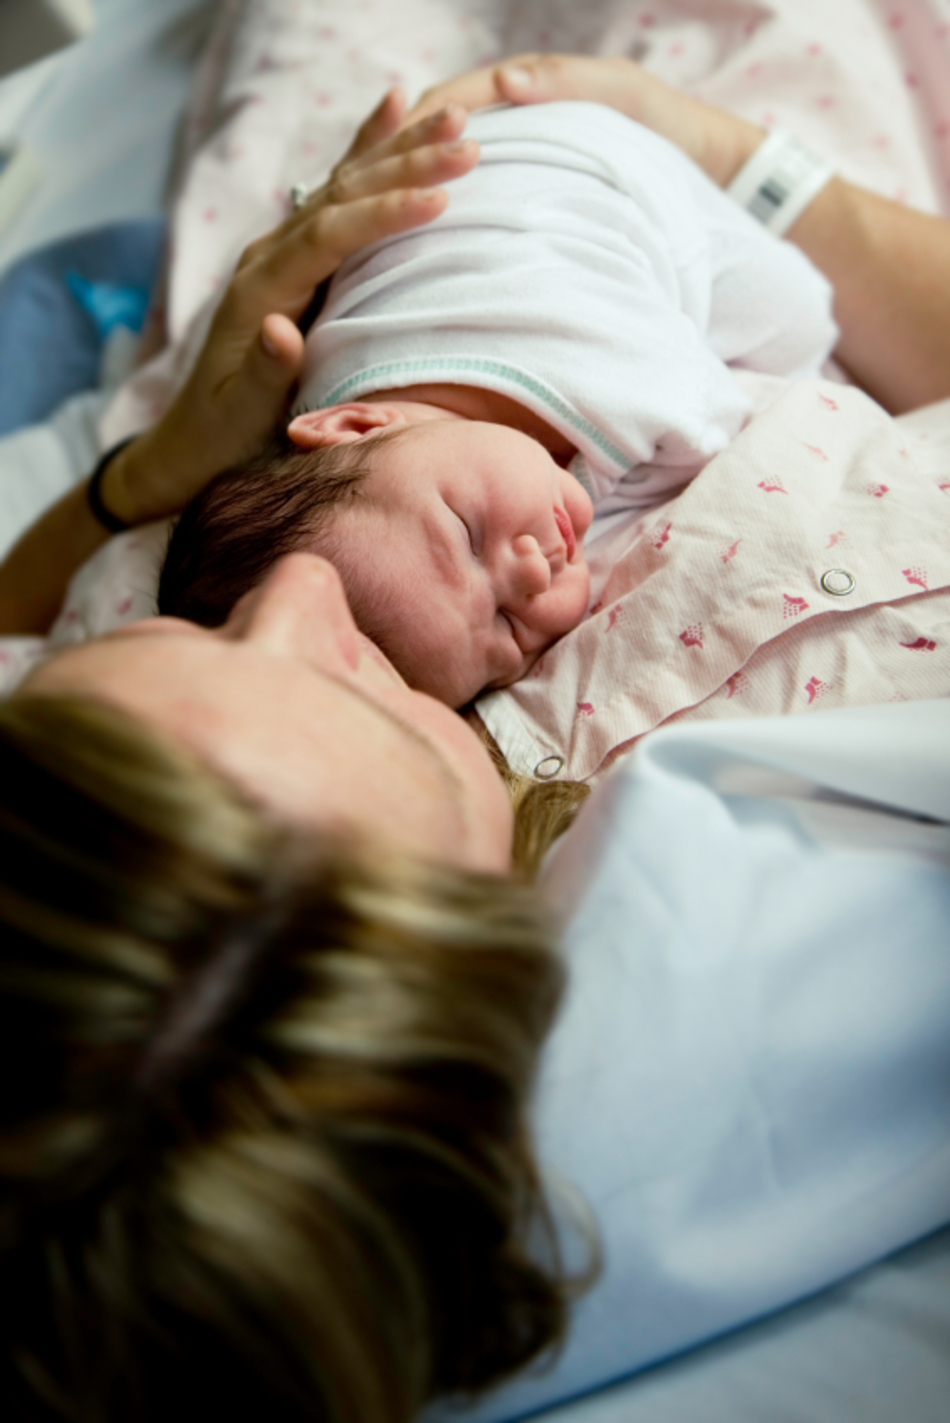 Is a Cesarean Section the Safest Way to Deliver a Baby?